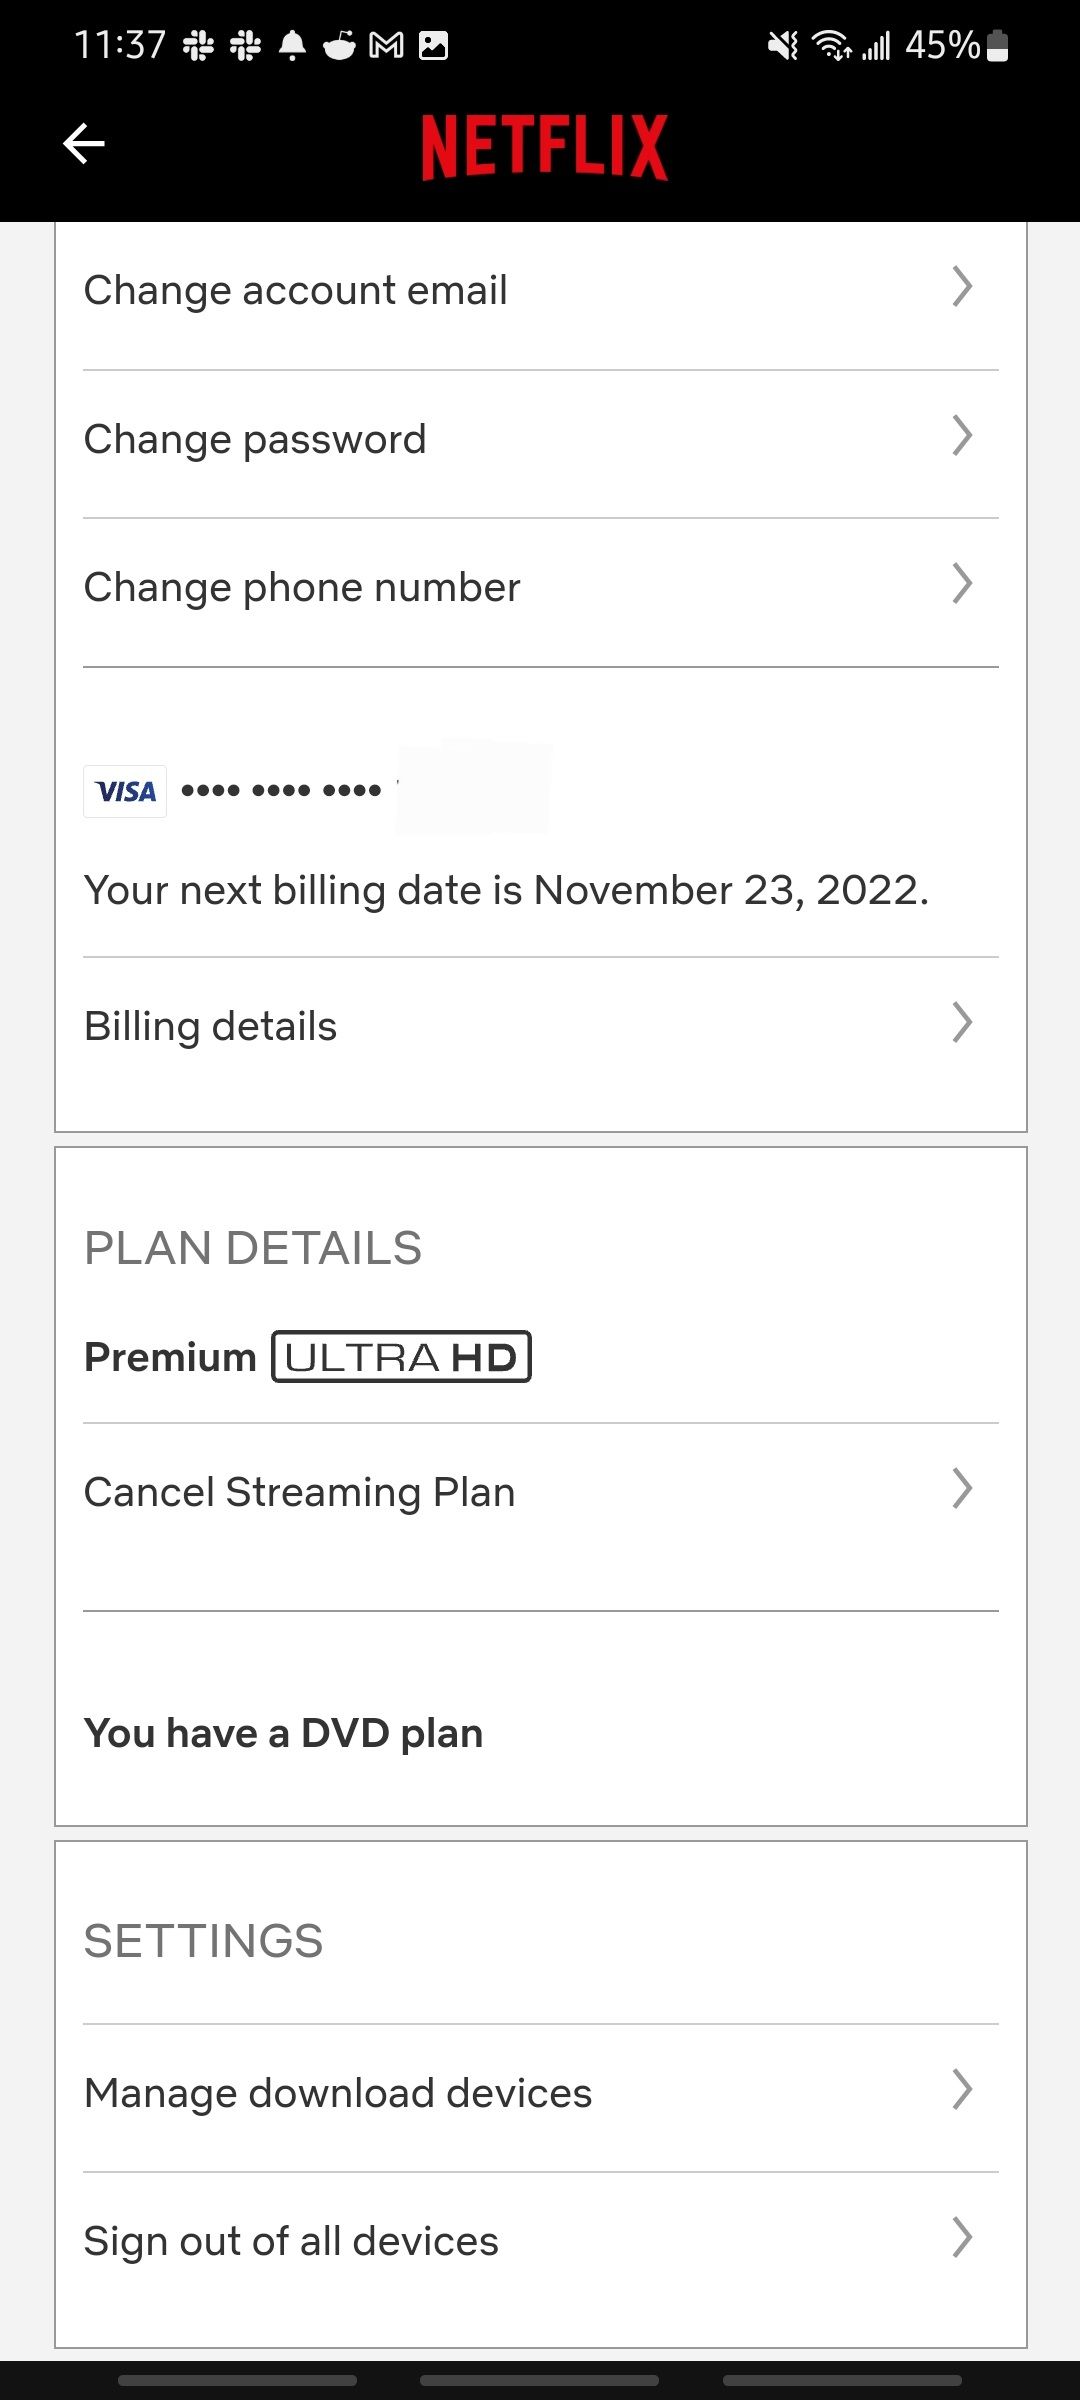 netflix mobile app account screen with billing and plan details